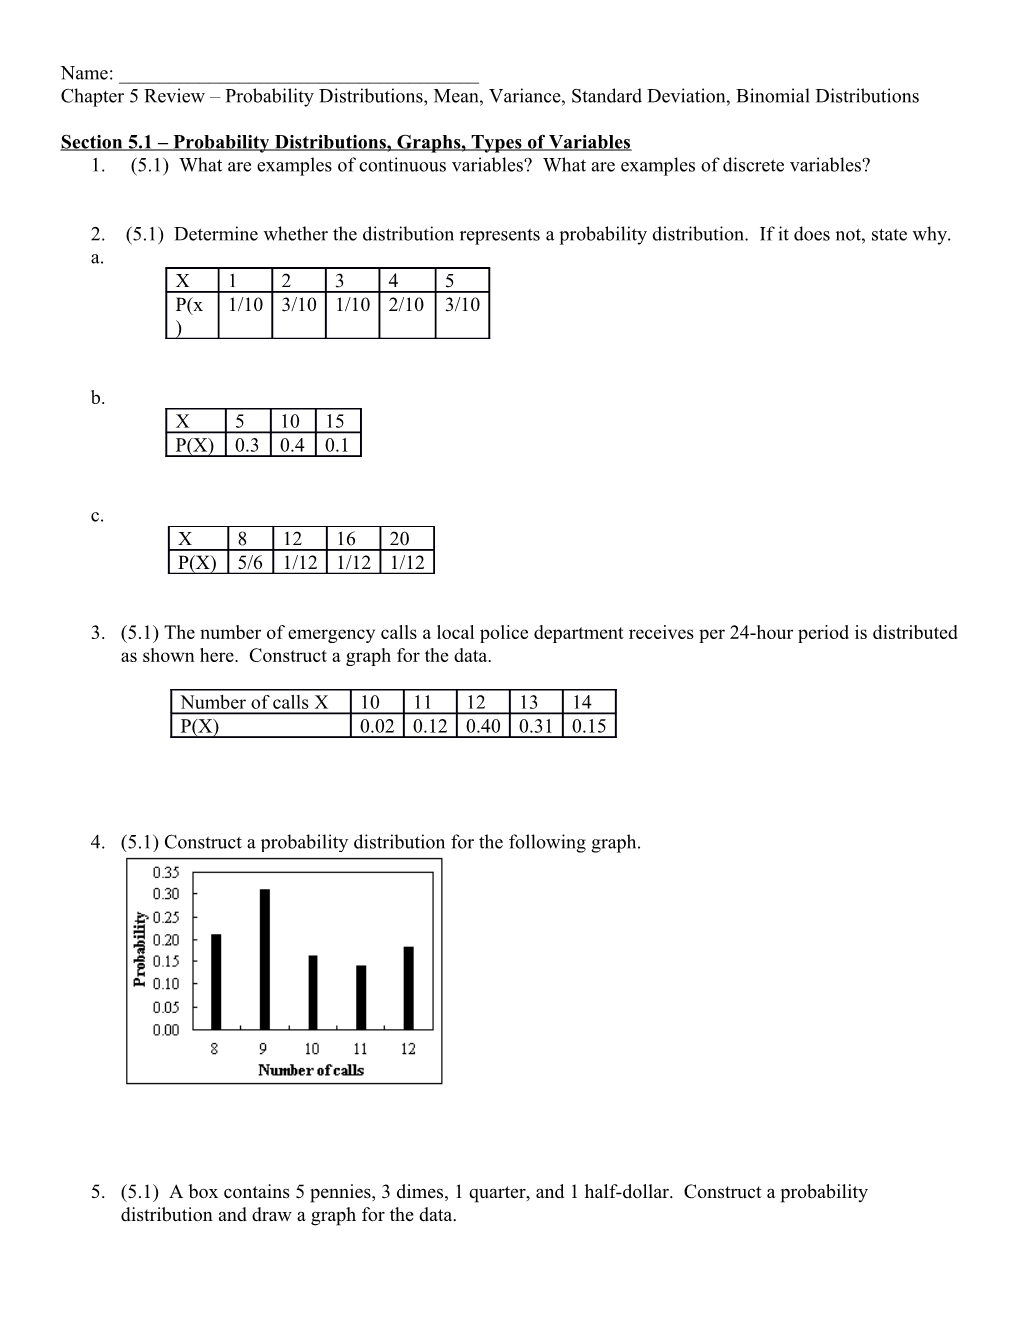 Section 5.1 Probability Distributions, Graphs, Types of Variables